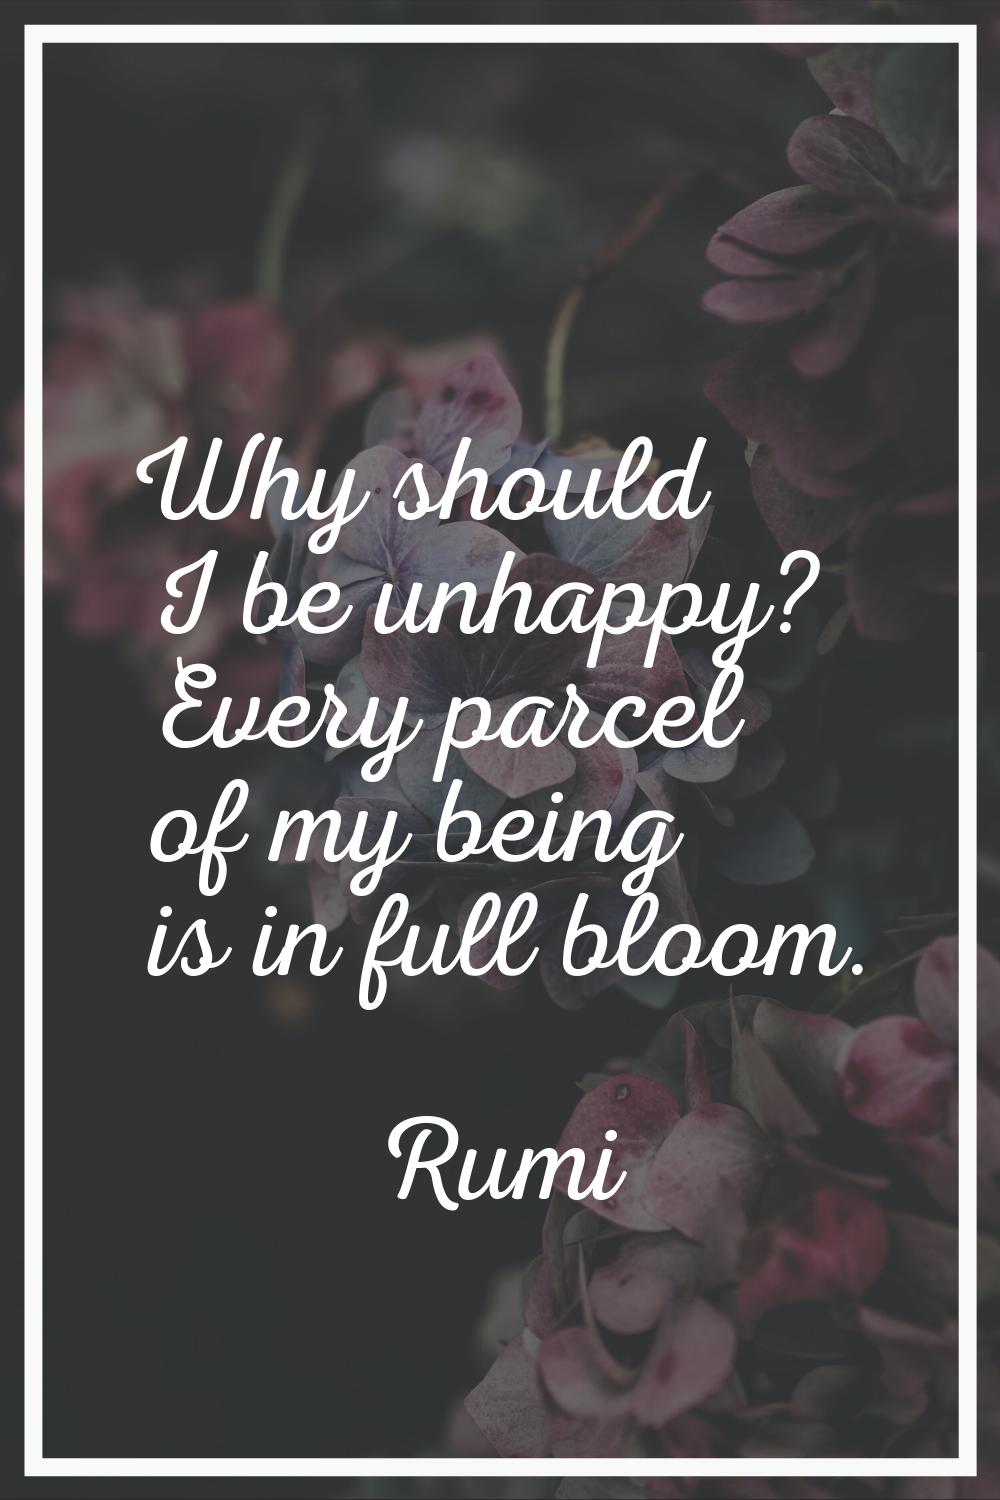 Why should I be unhappy? Every parcel of my being is in full bloom.